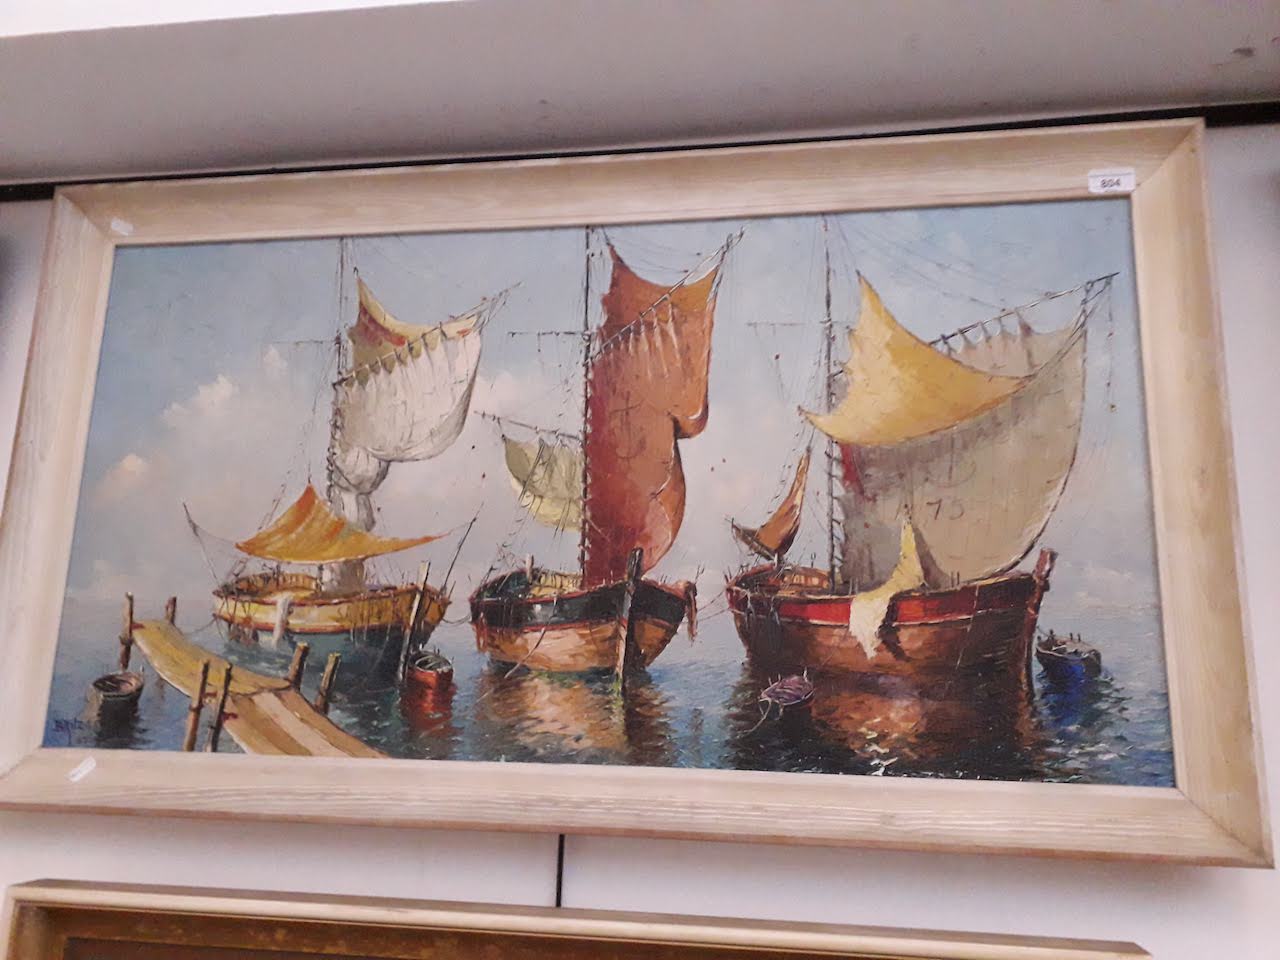 20th century school, oil on canvas, Mediterranean scene with boats, 99.5cm x 50.5cm, signed '